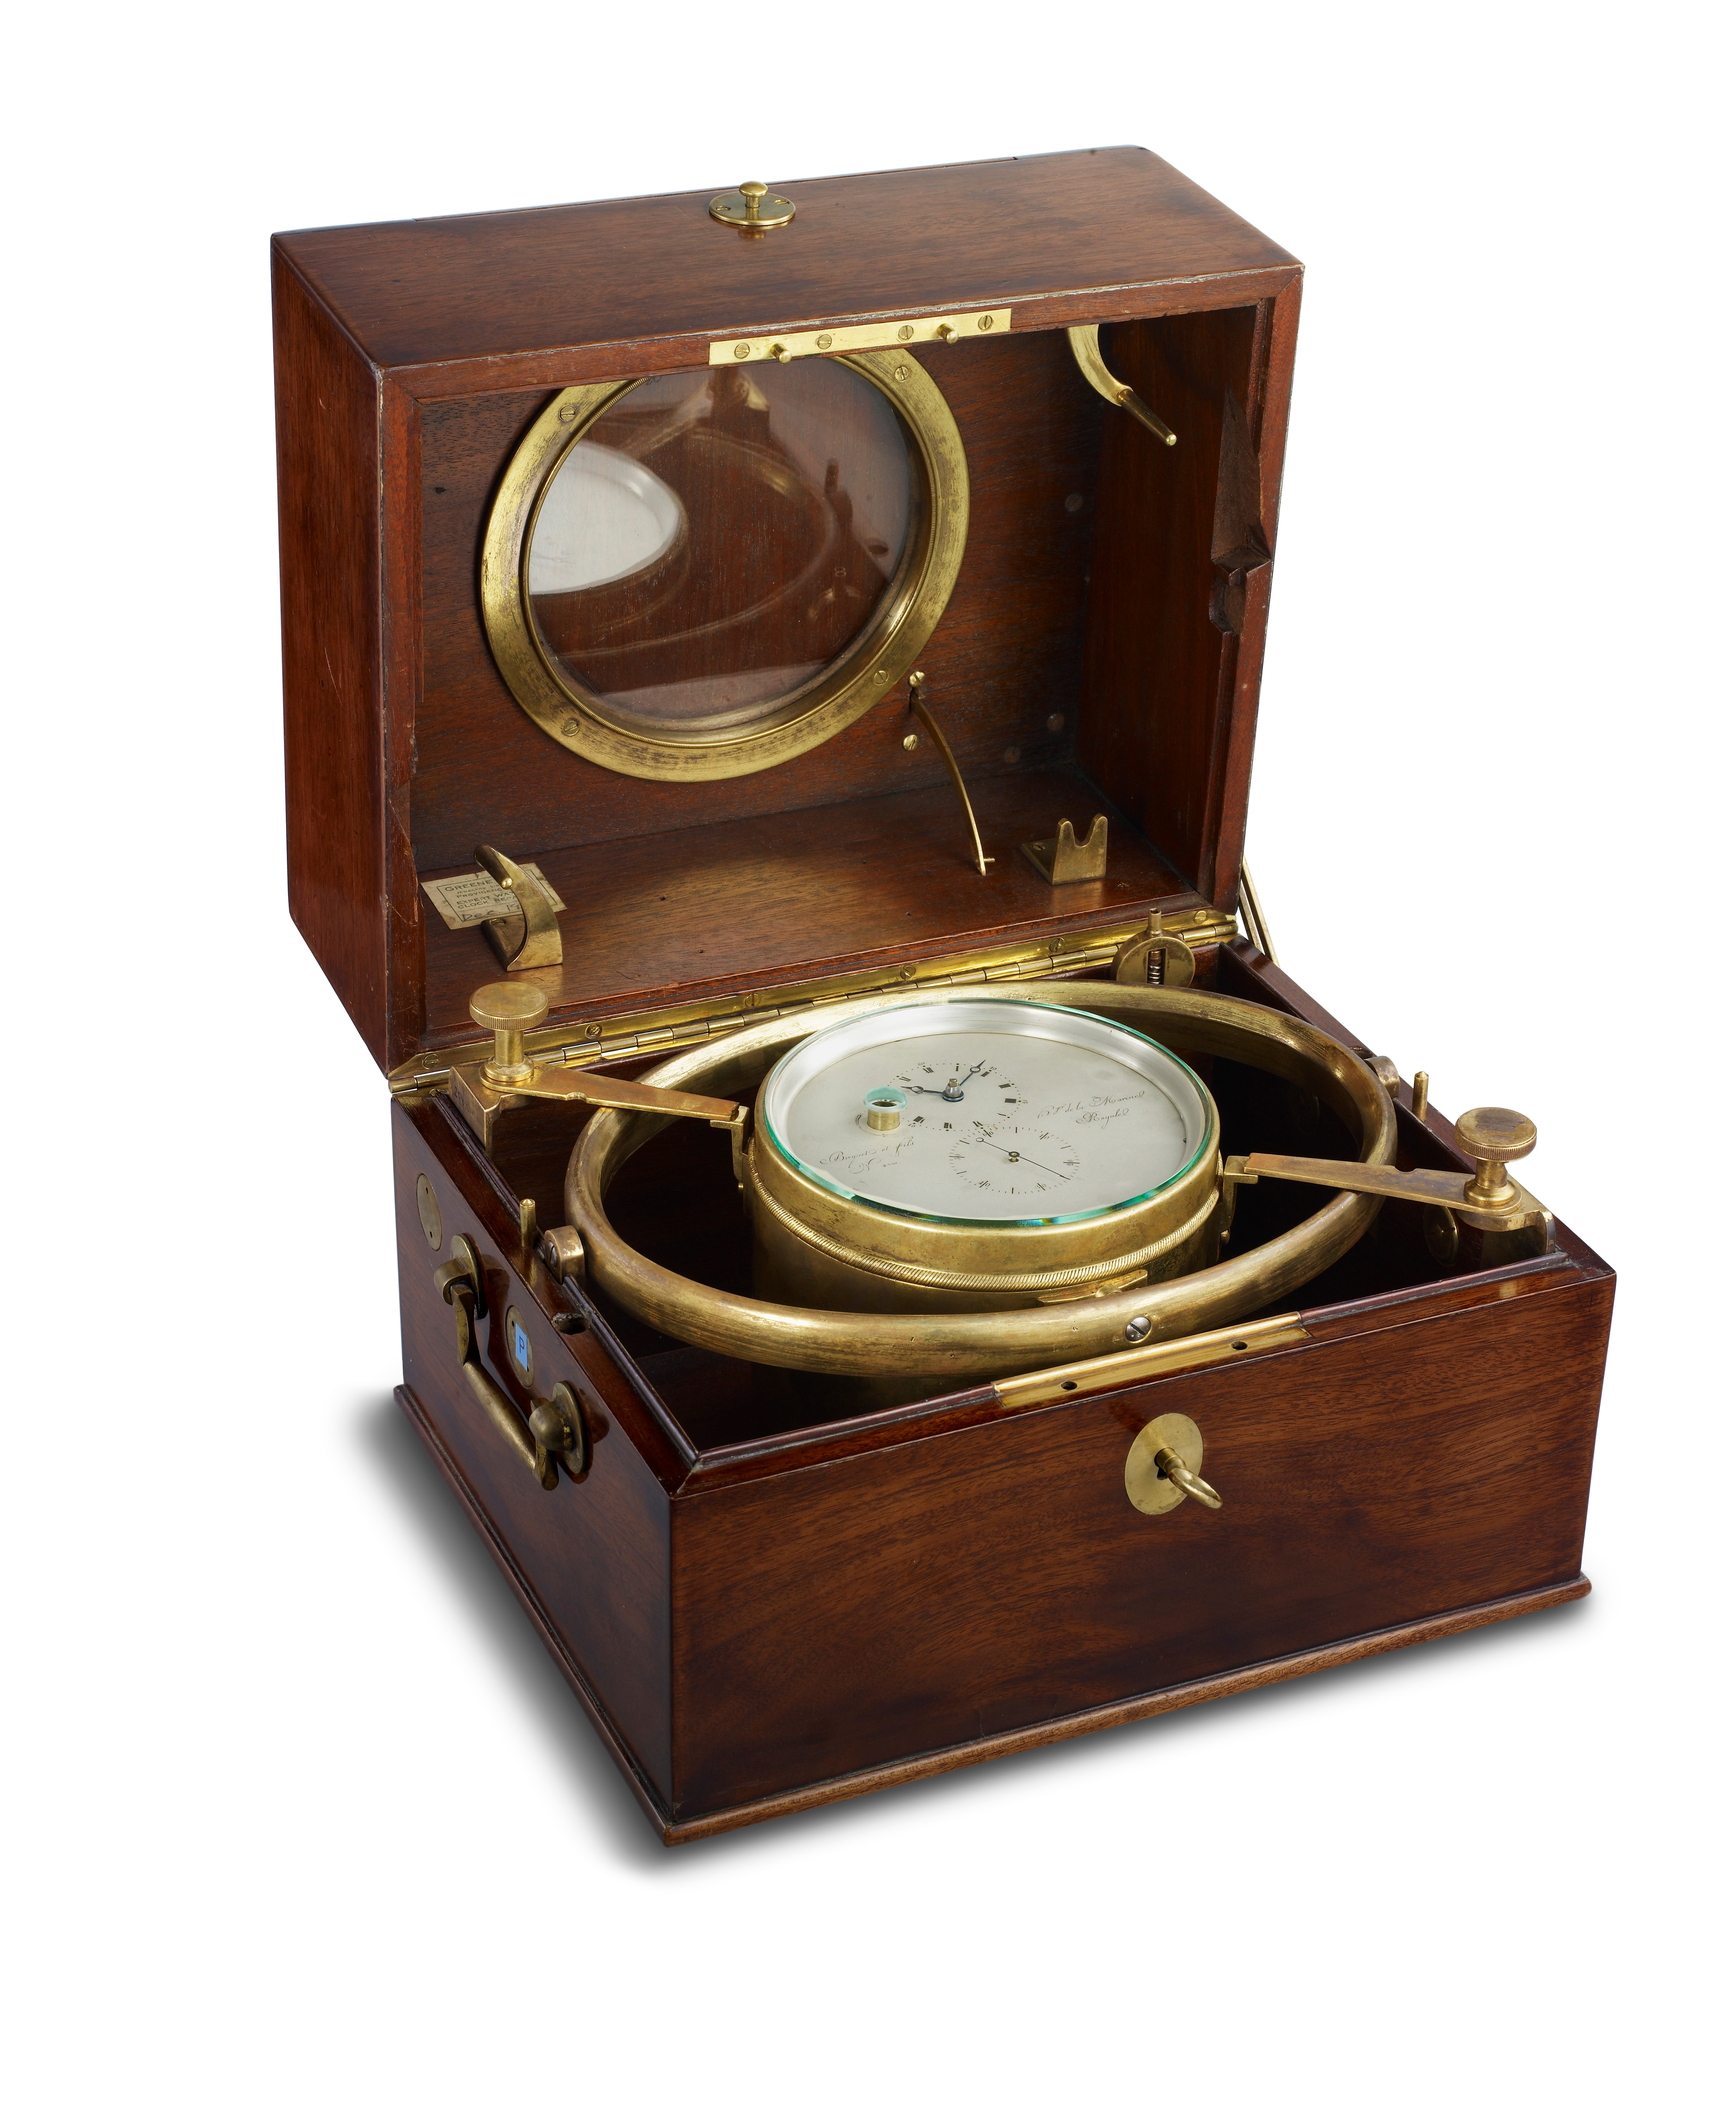 Chronometer-Maker to the French Royal Navy